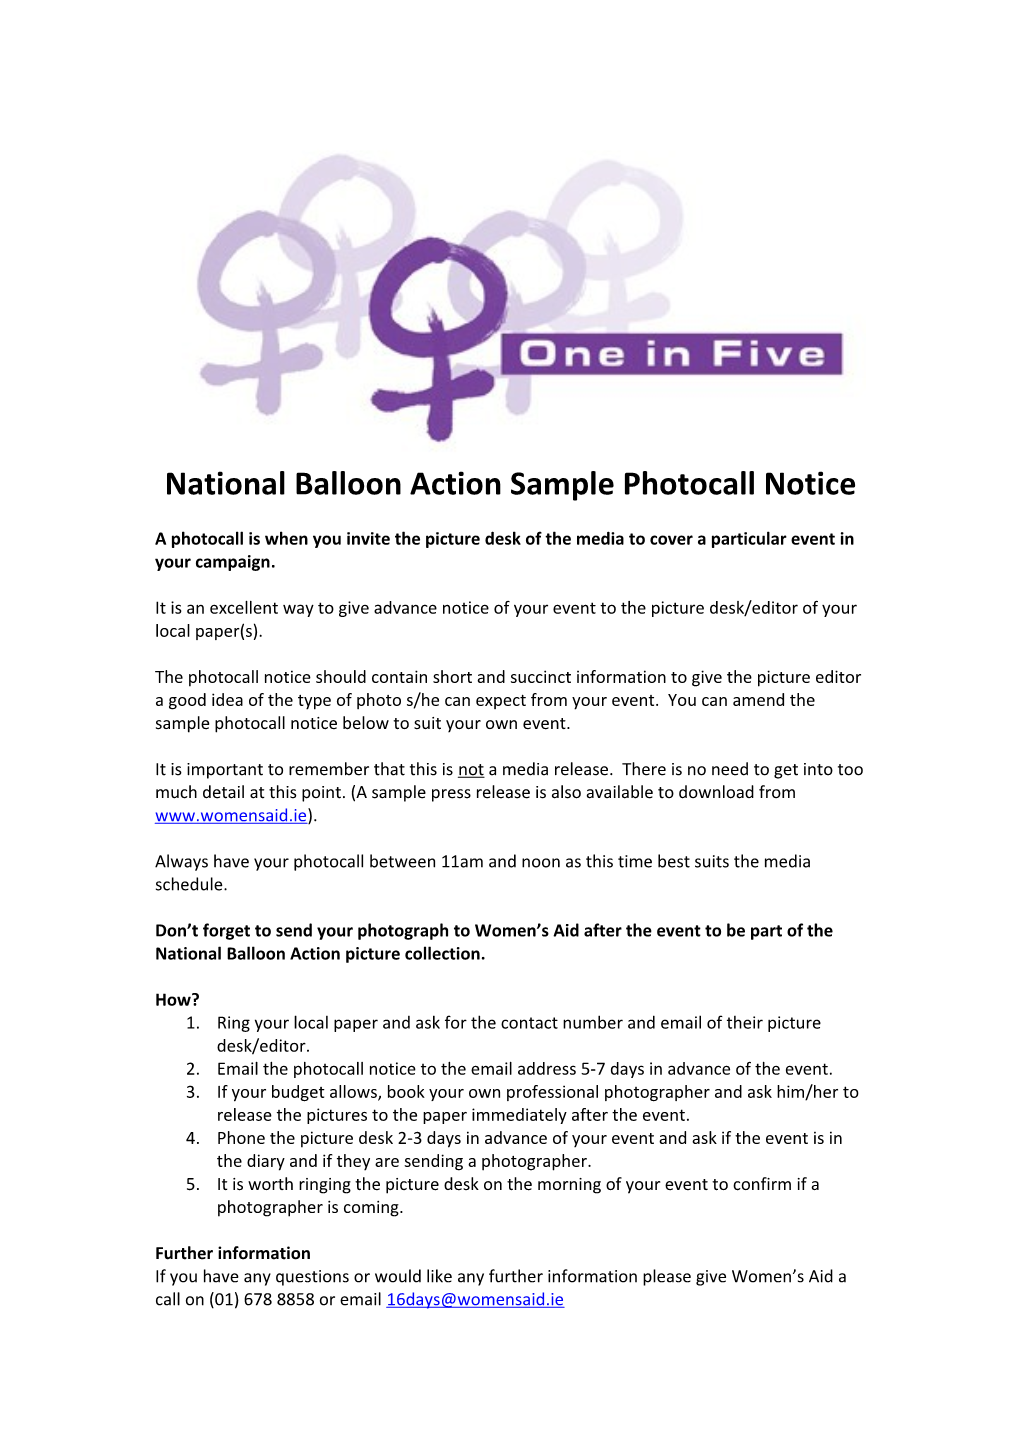 National Balloon Action Sample Photocall Notice